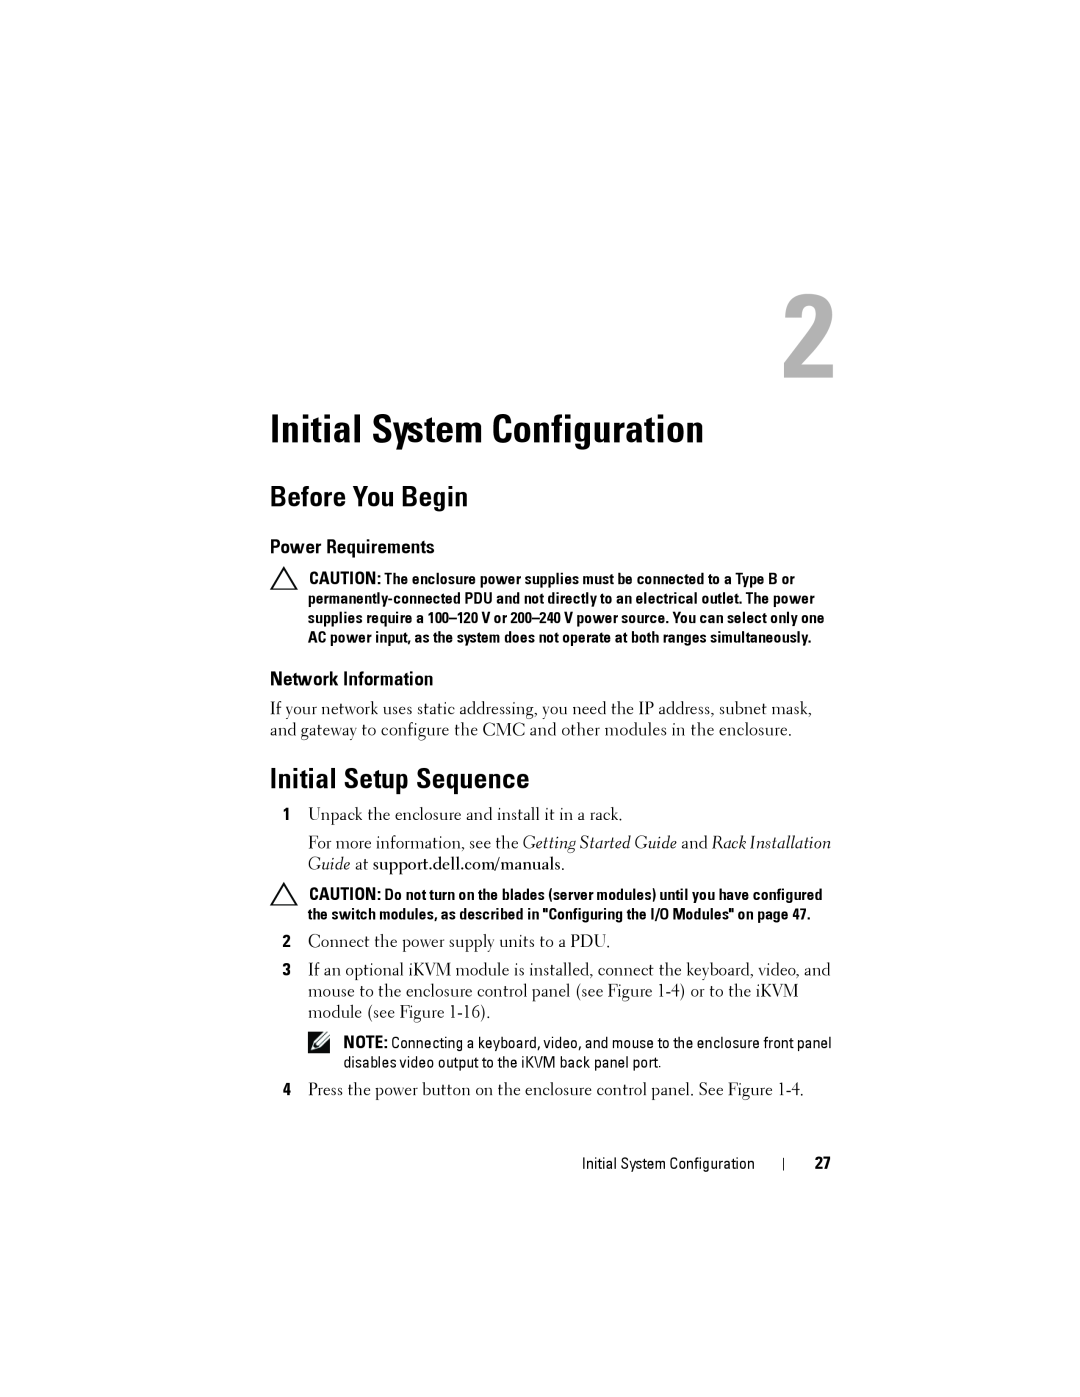 Dell M1000E manual Initial System Configuration, Before You Begin, Initial Setup Sequence, Power Requirements 